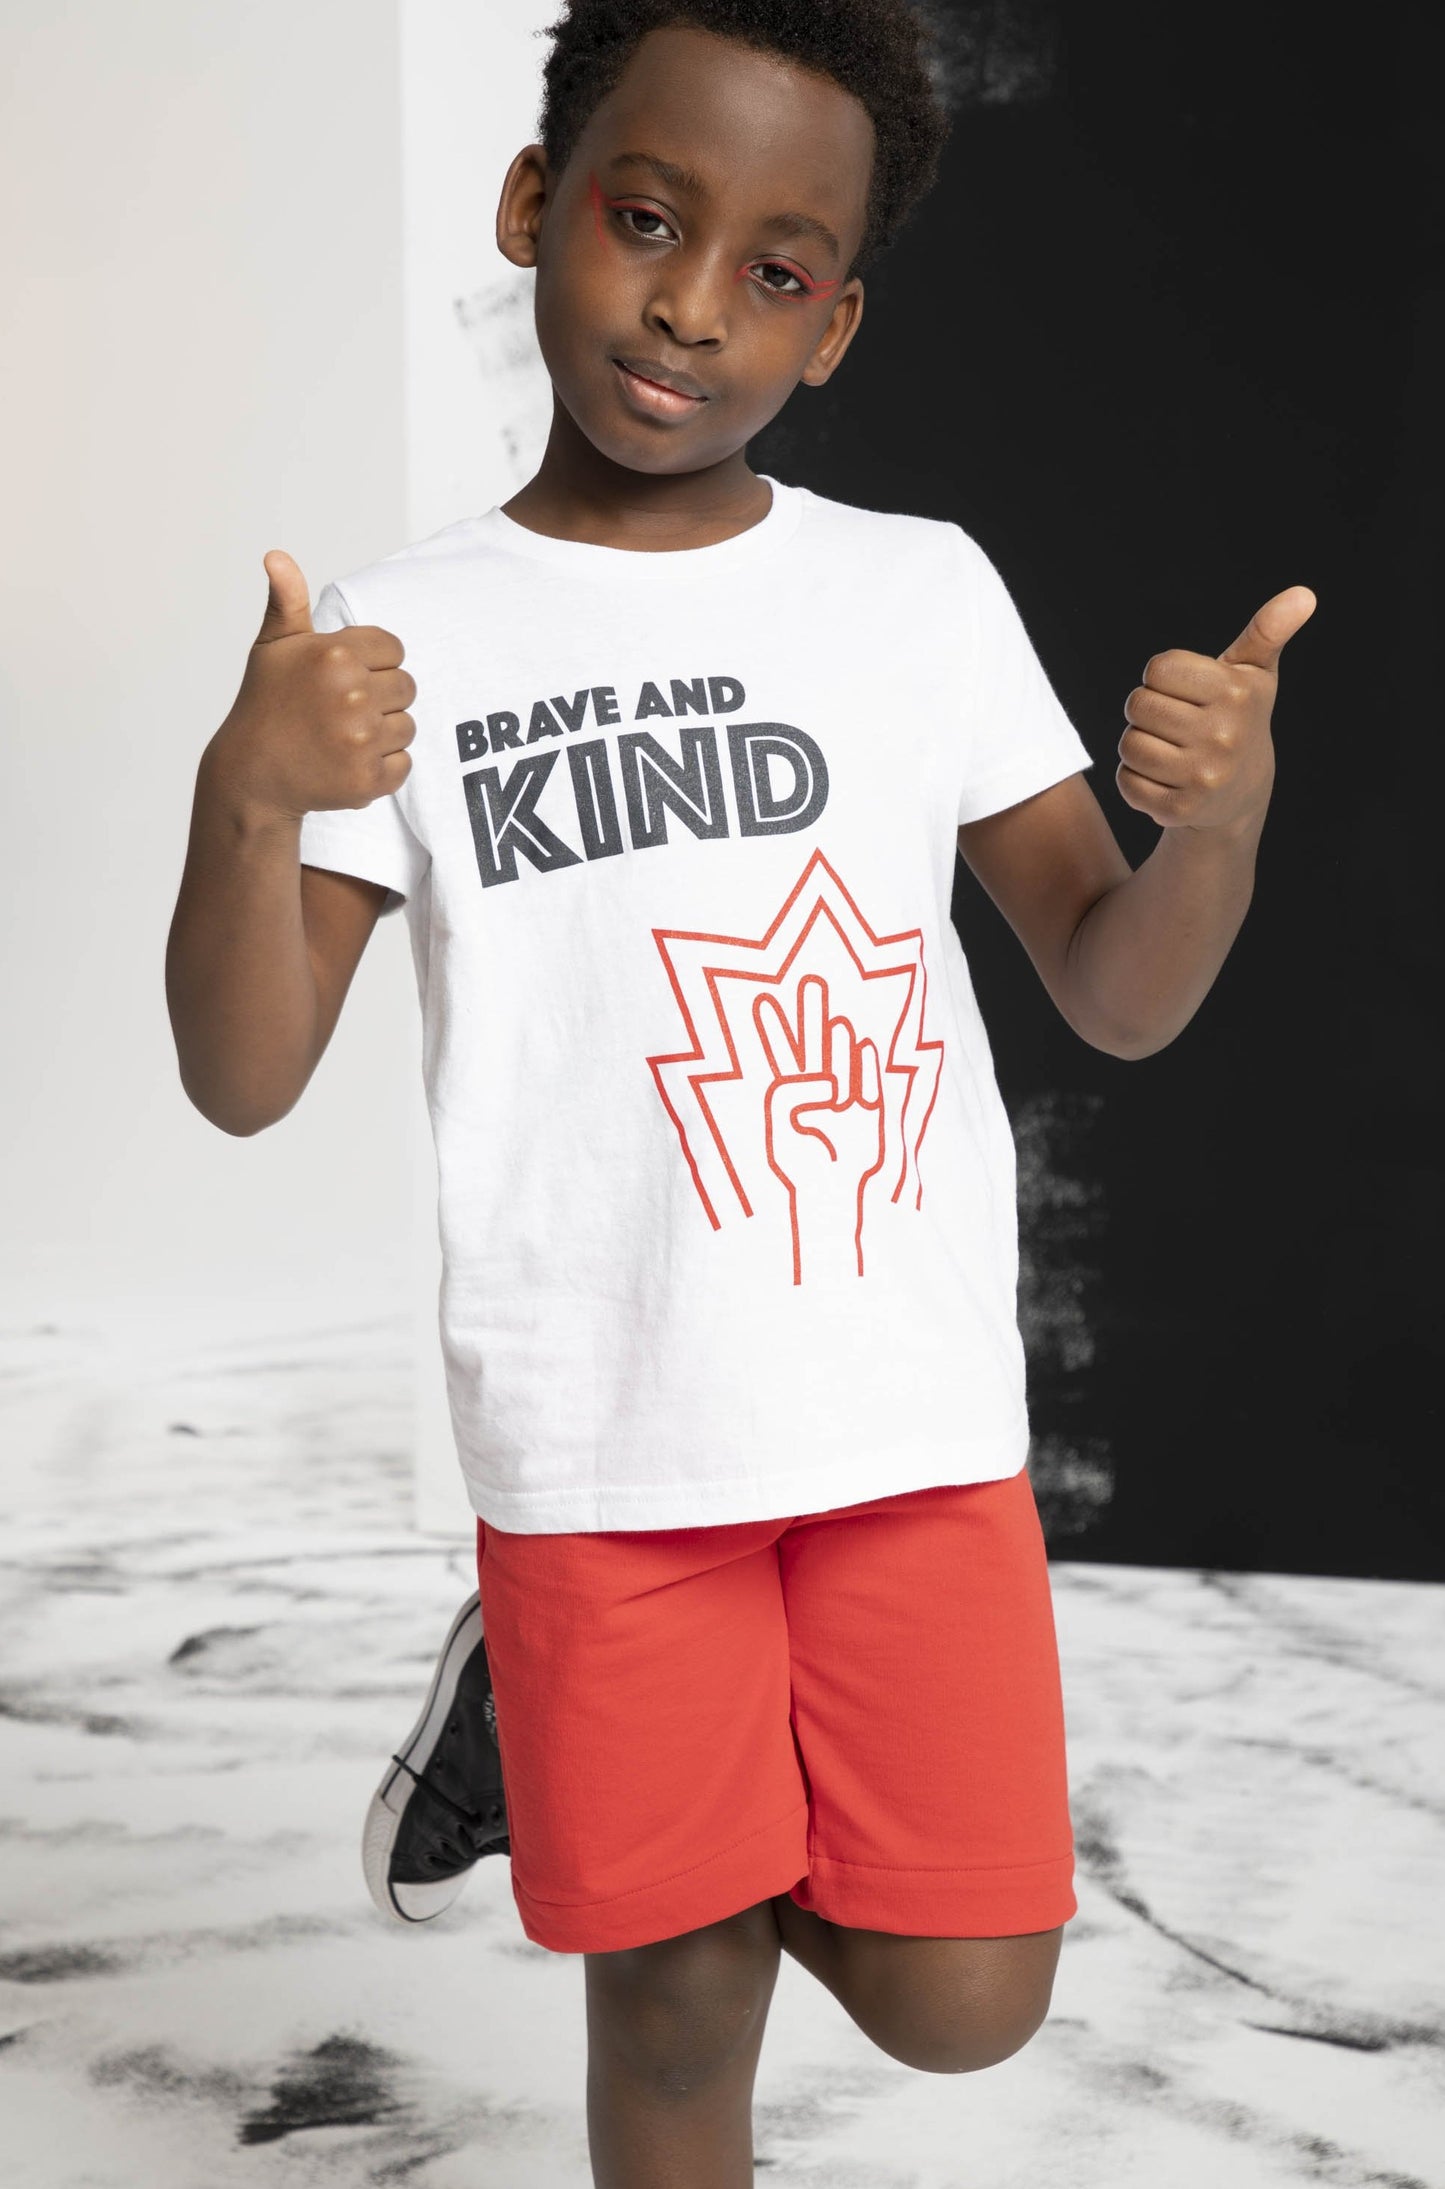 Young boy puts both thumbs up and a lef back to being brave in kind in his t-shirt and chief shorts